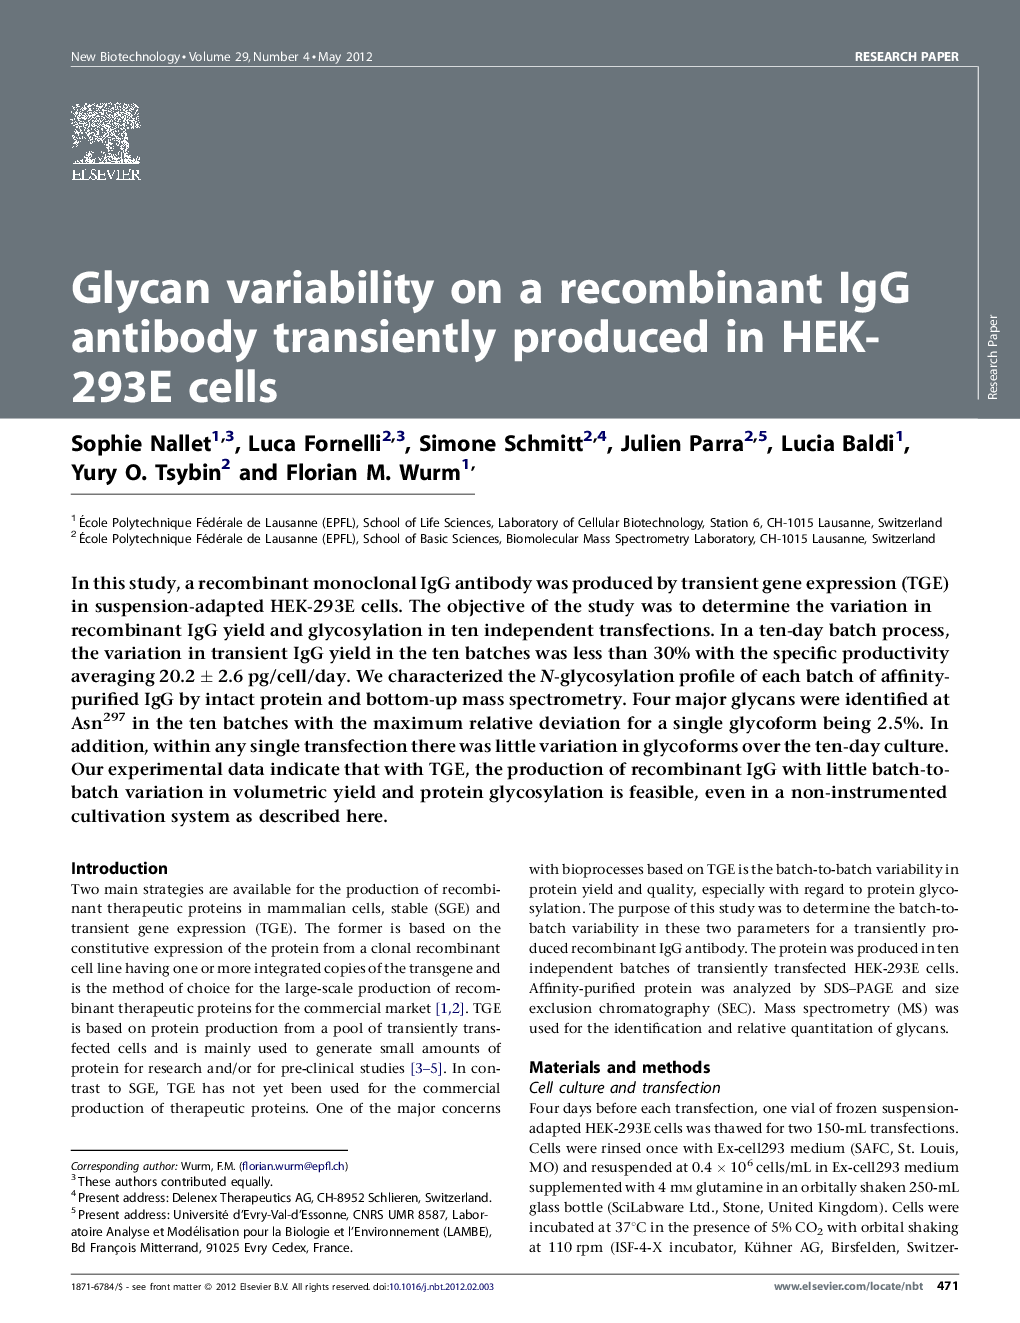 Glycan variability on a recombinant IgG antibody transiently produced in HEK-293E cells